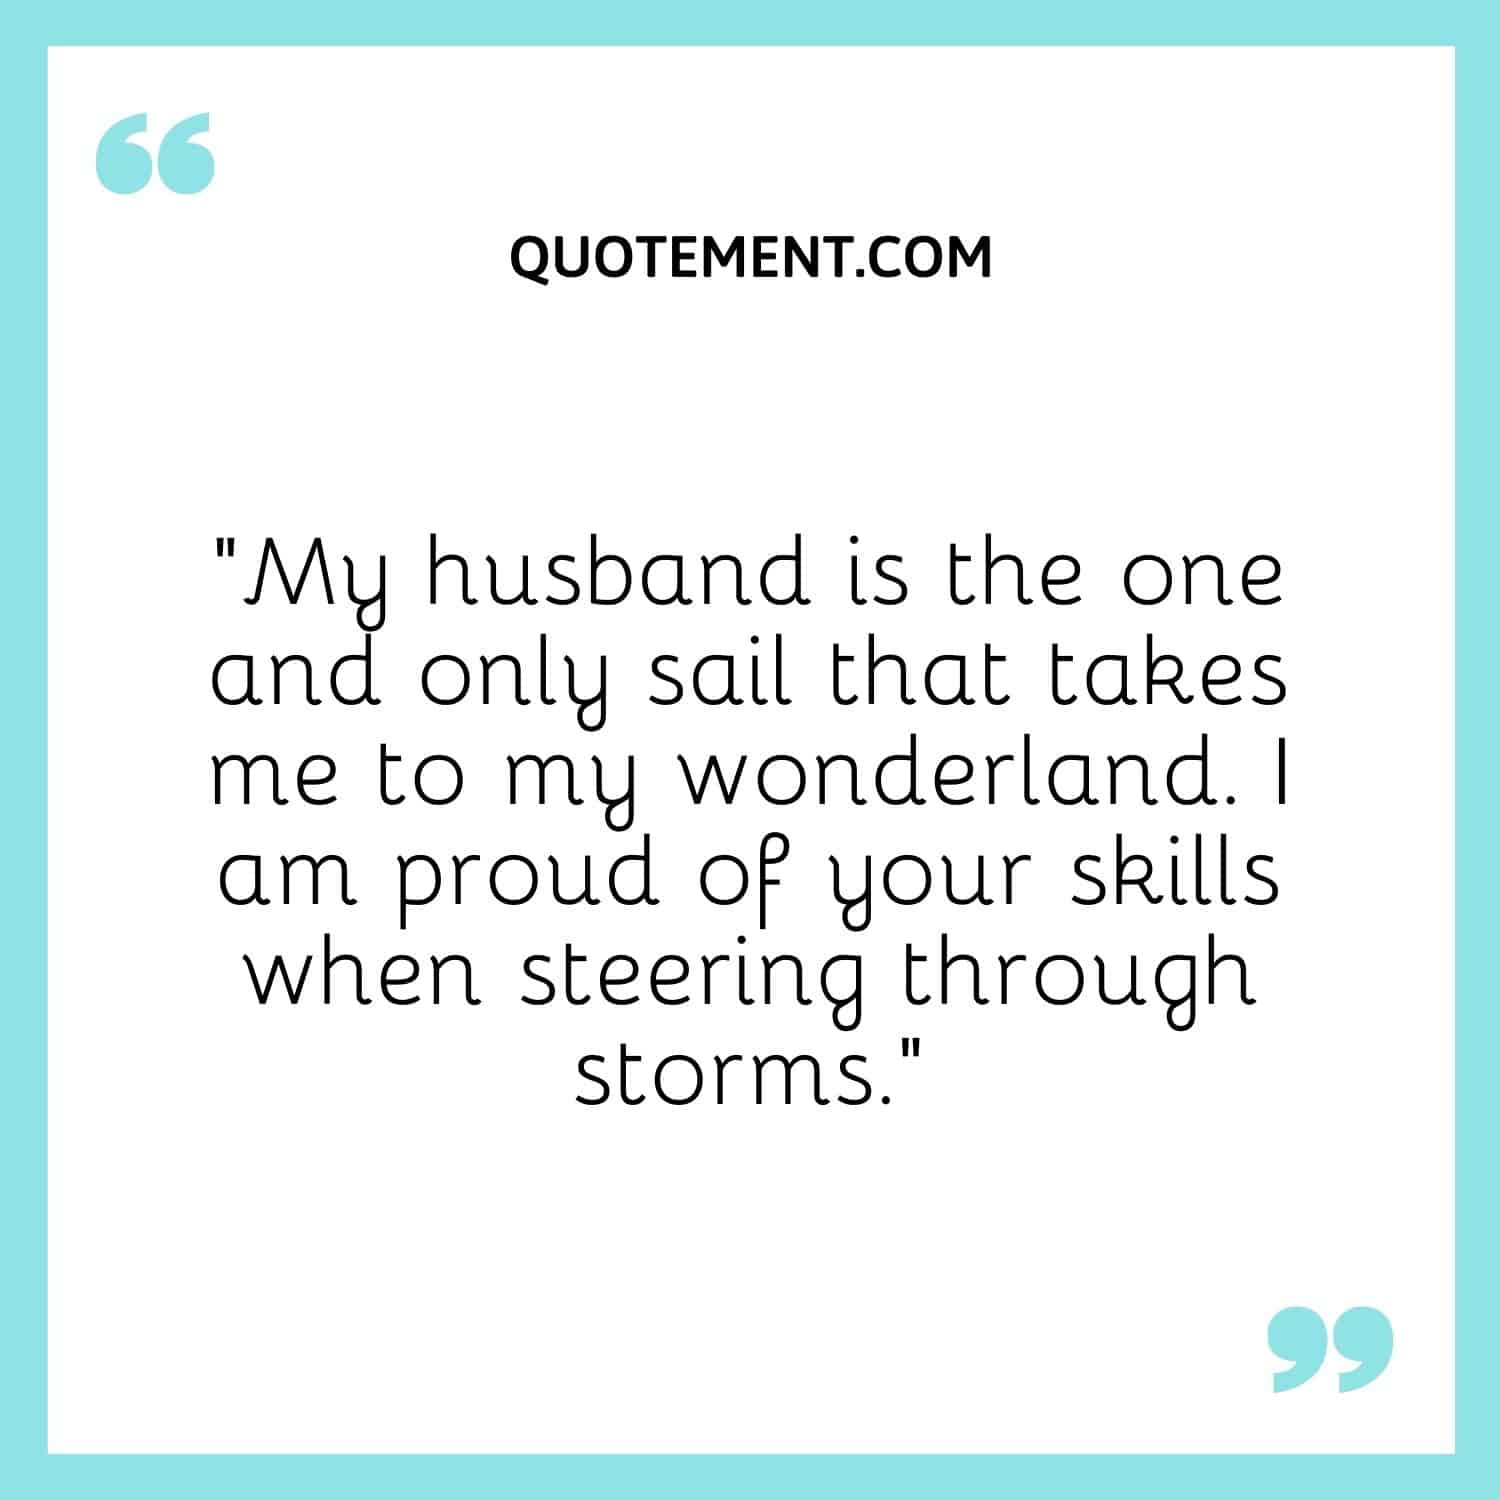 “My husband is the one and only sail that takes me to my wonderland. I am proud of your skills when steering through storms.”